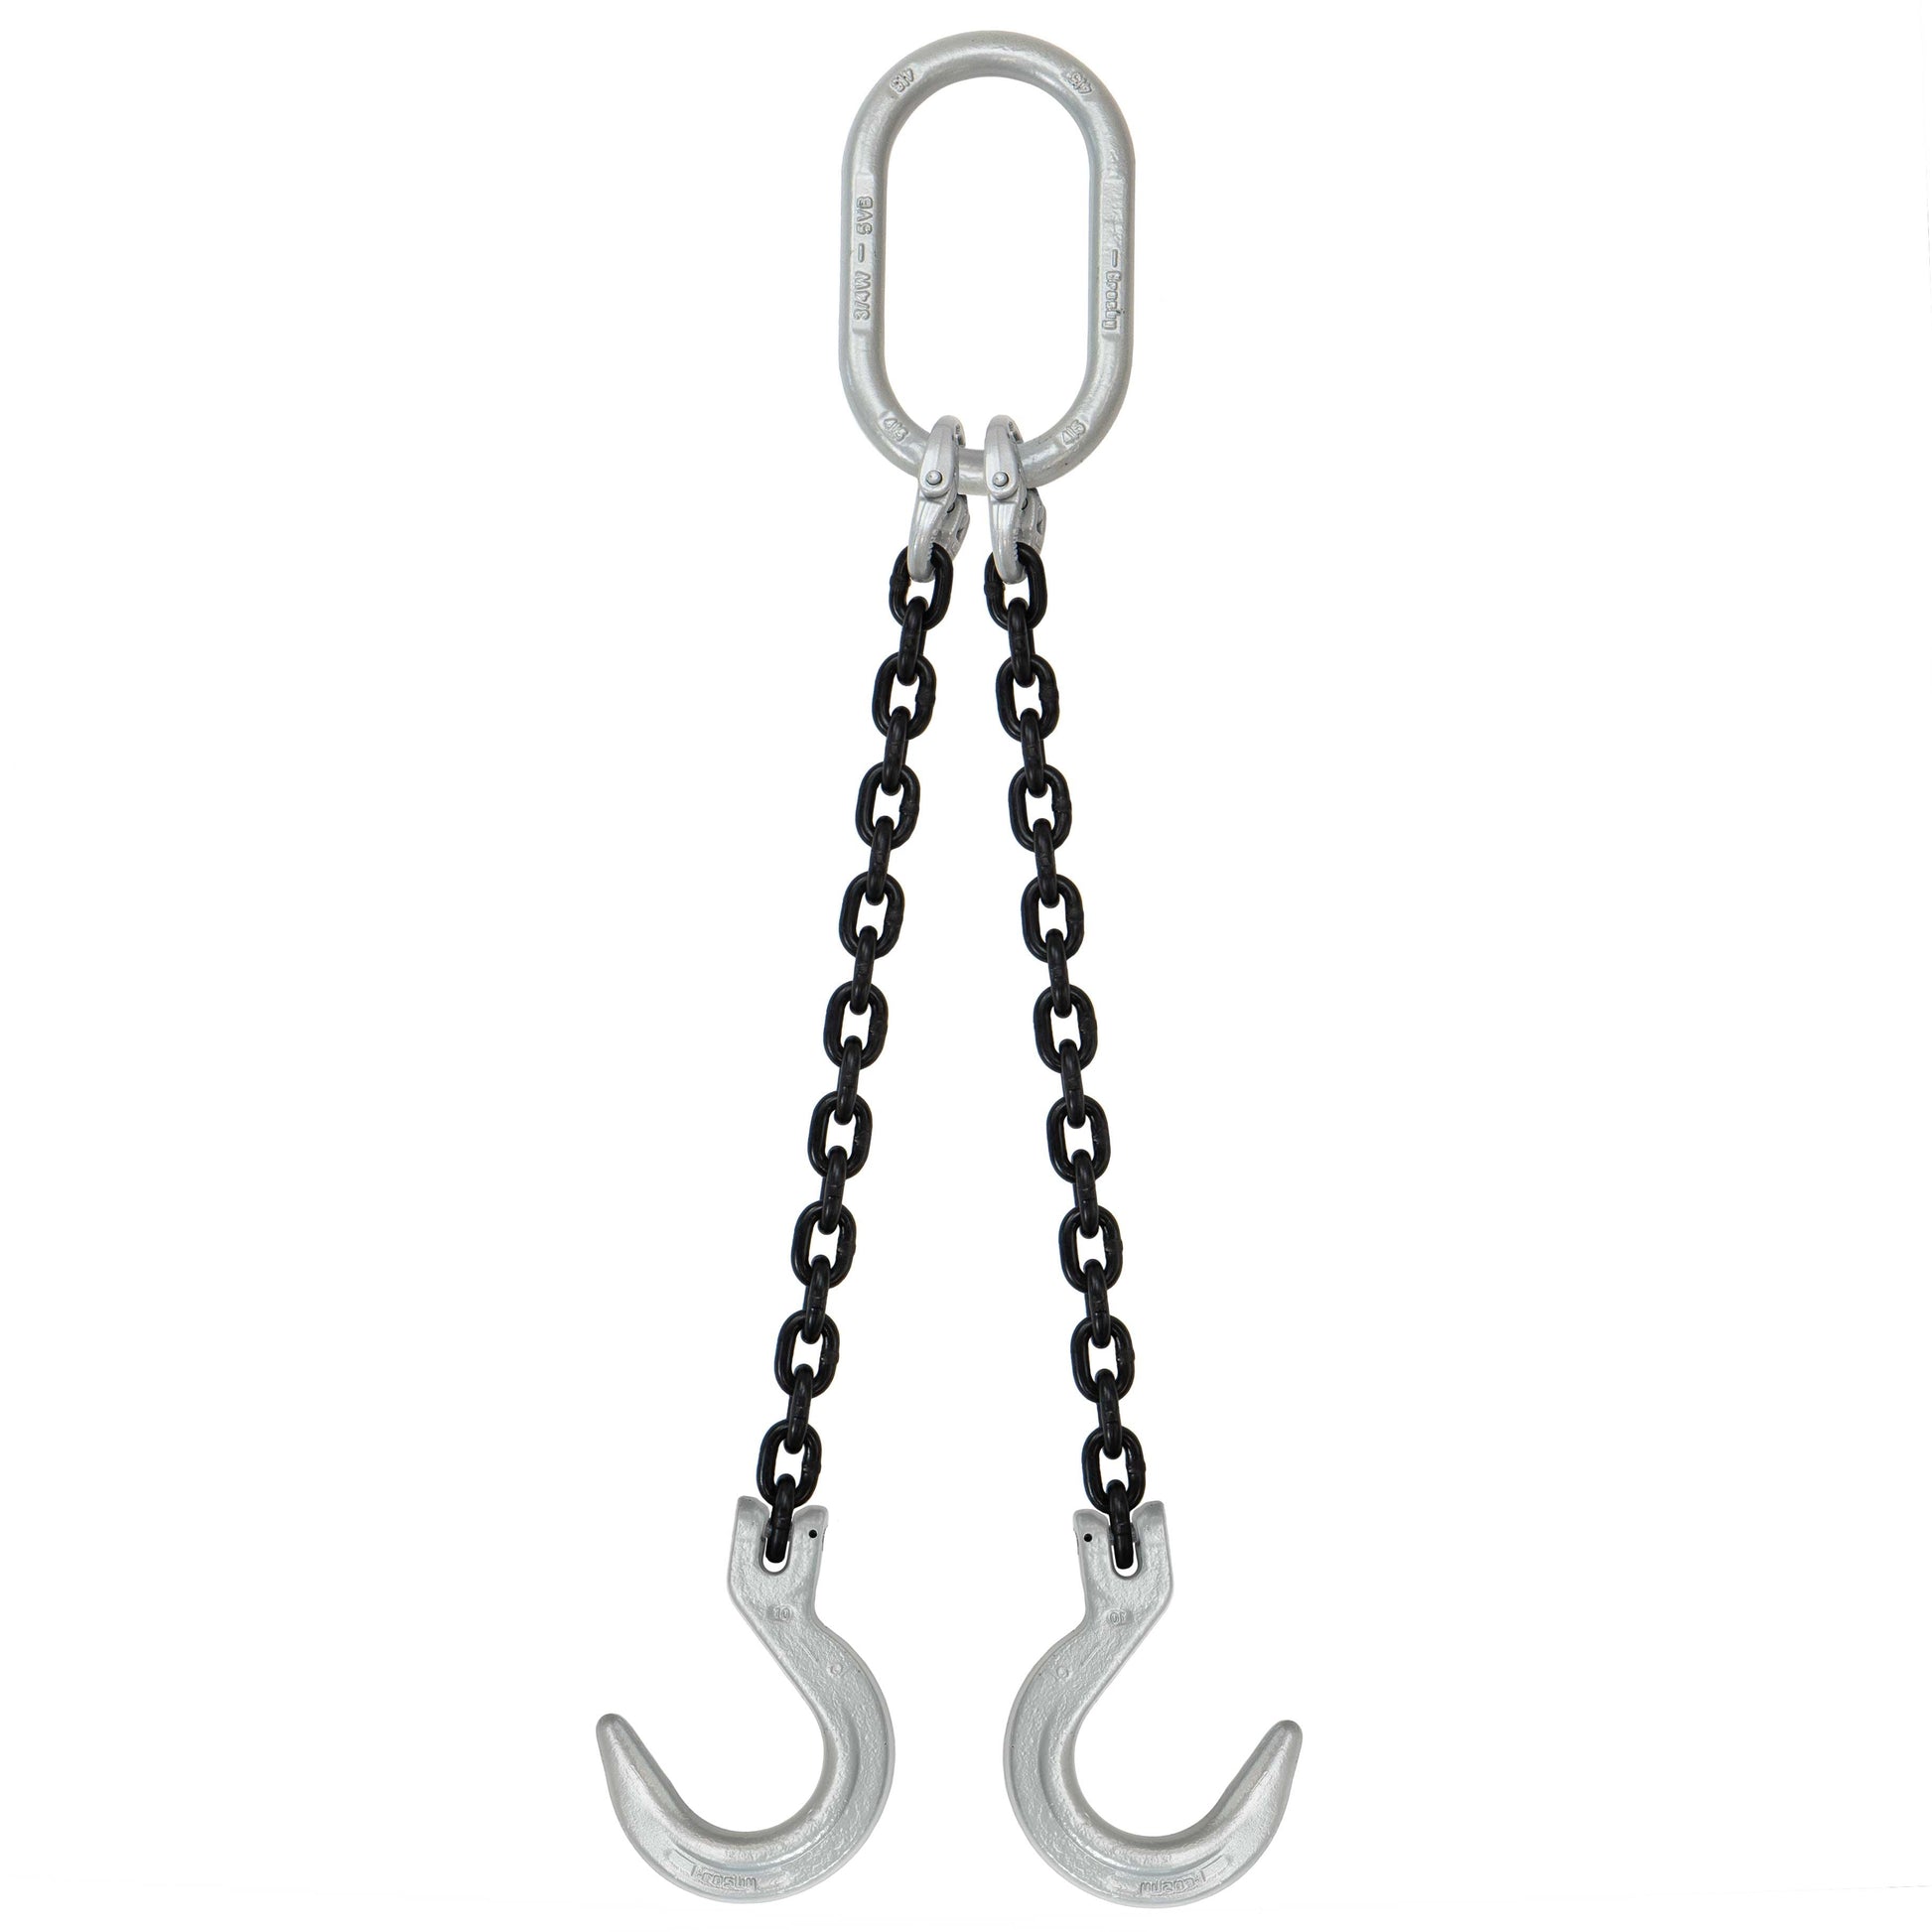 12 inch x 6 foot Domestic 2 Leg Chain Sling w Crosby Foundry Hooks Grade 100 image 1 of 2